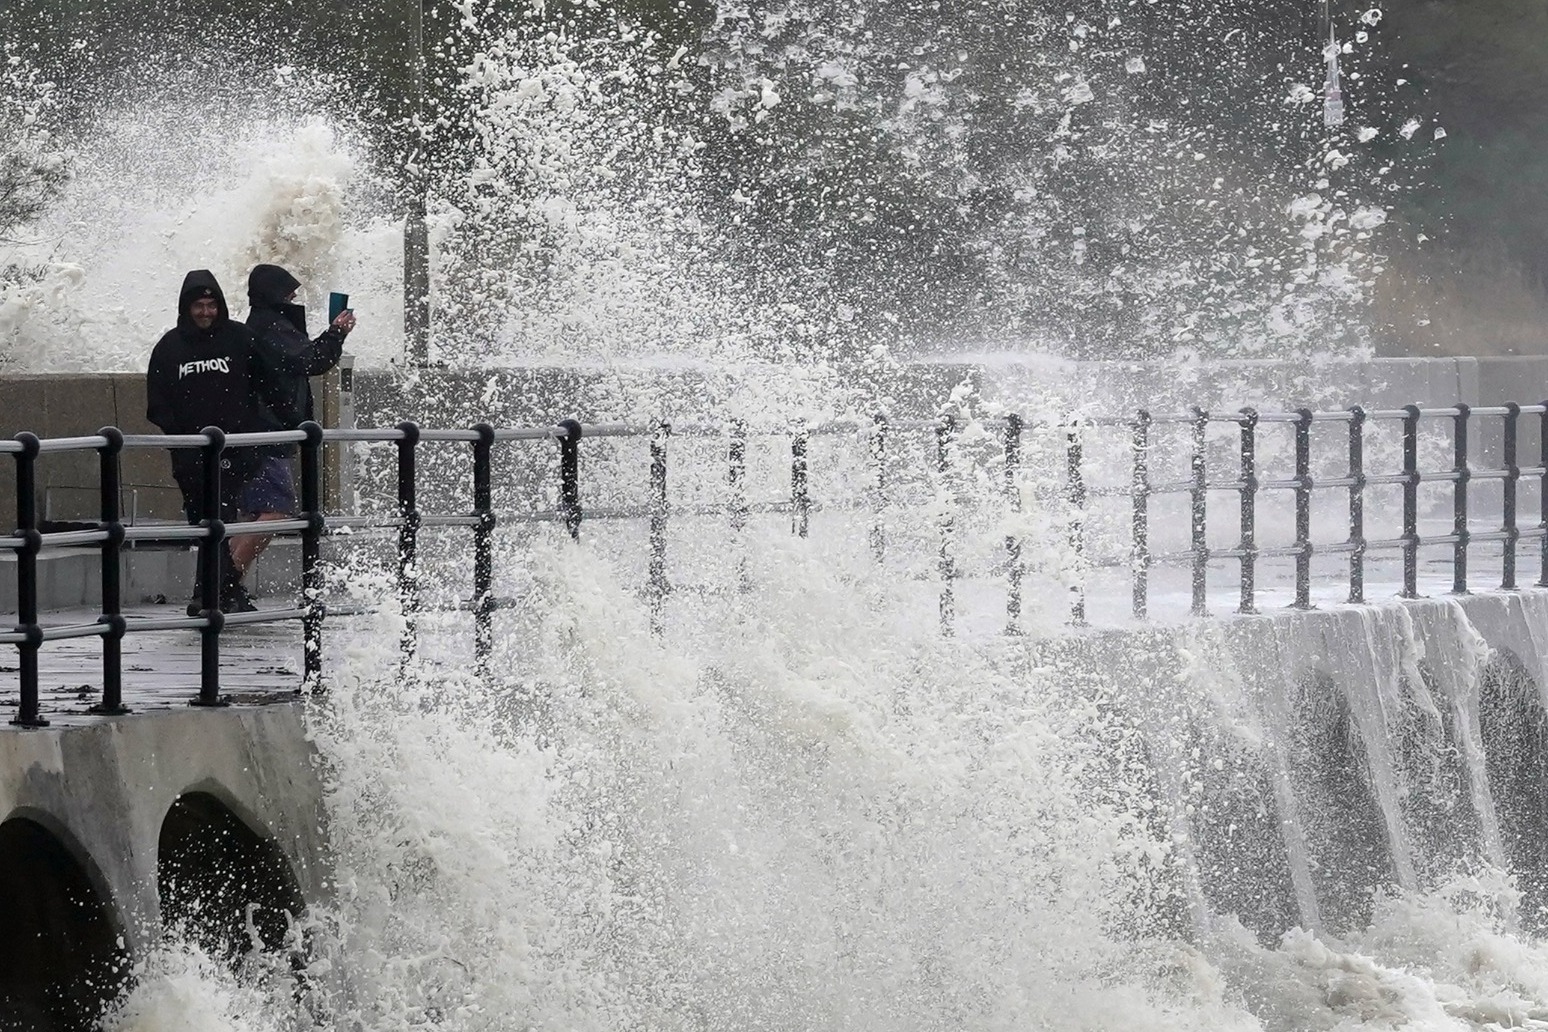 Storm Debi forecast to bring gale force winds to parts of UK 